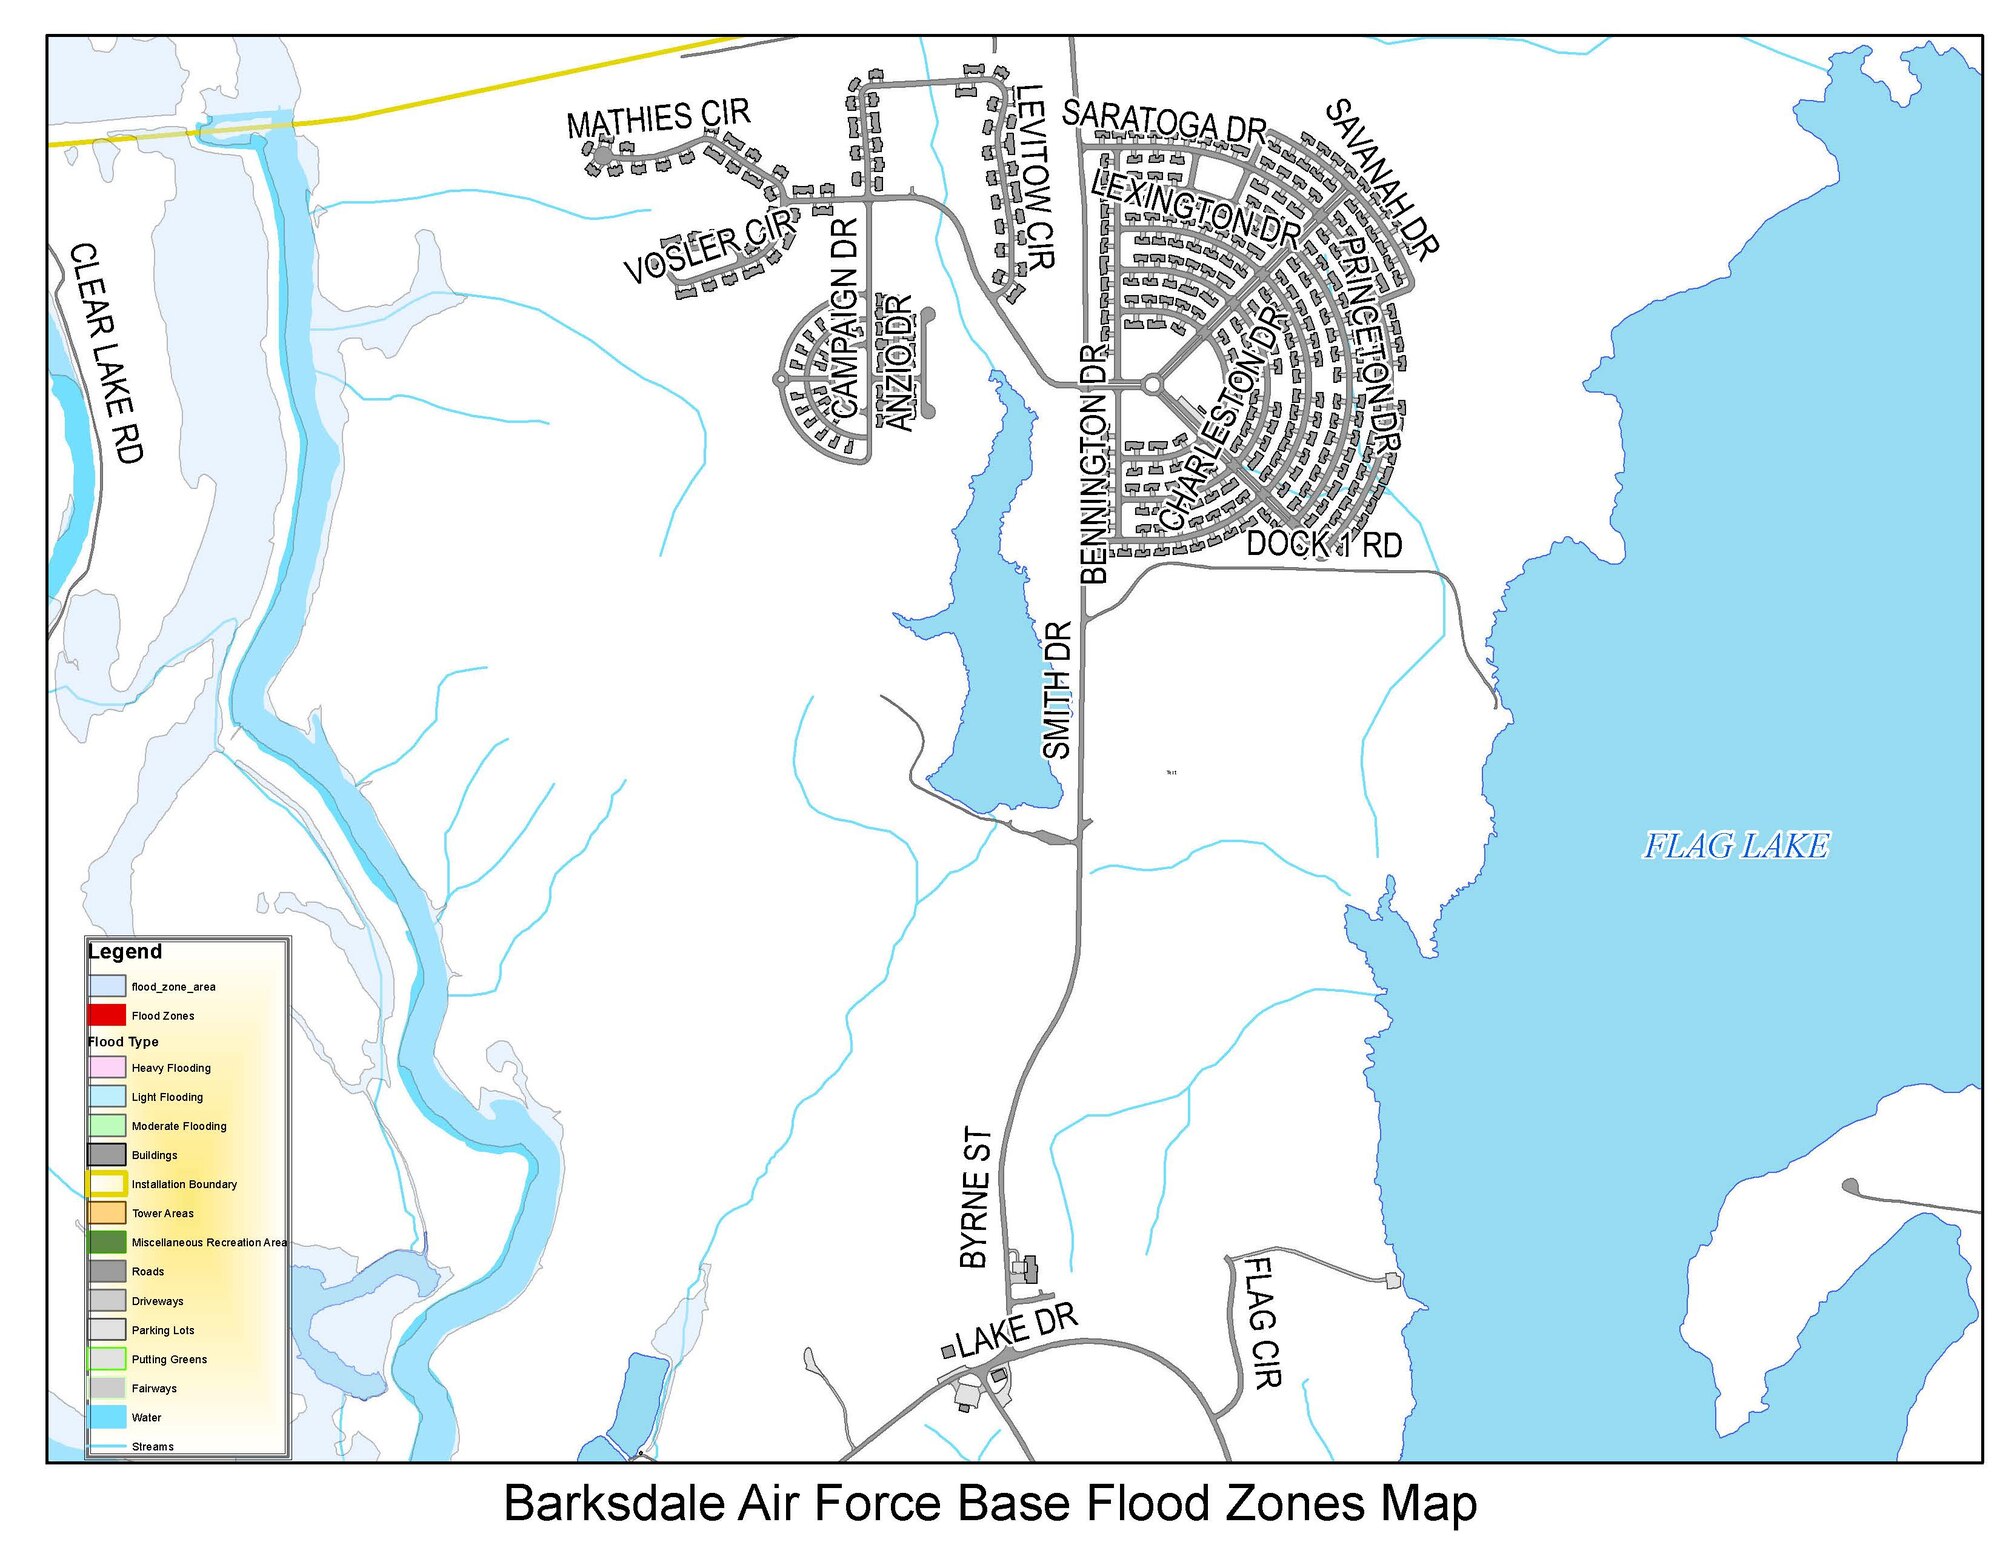 Barksdale Air Force Base flood zones map near the east side housing. Flood waters should be avoided because just six inches of moving water can knock you down and two feet of water can sweep your vehicle away. (U.S. Air Force graphic)